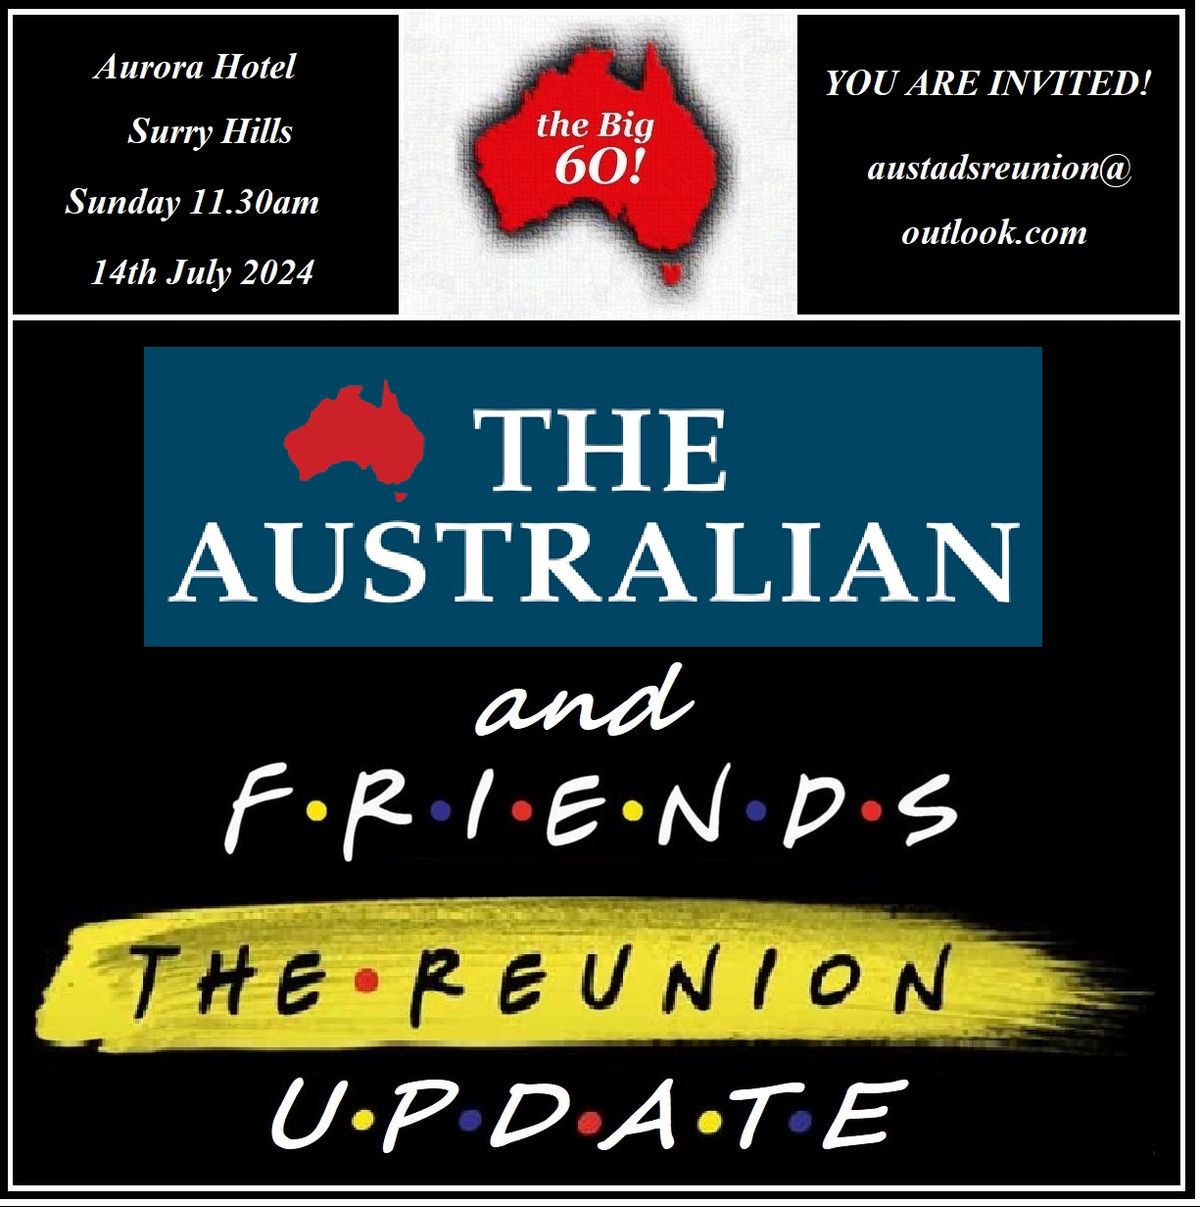 The Australian and Friends Unofficial Reunion